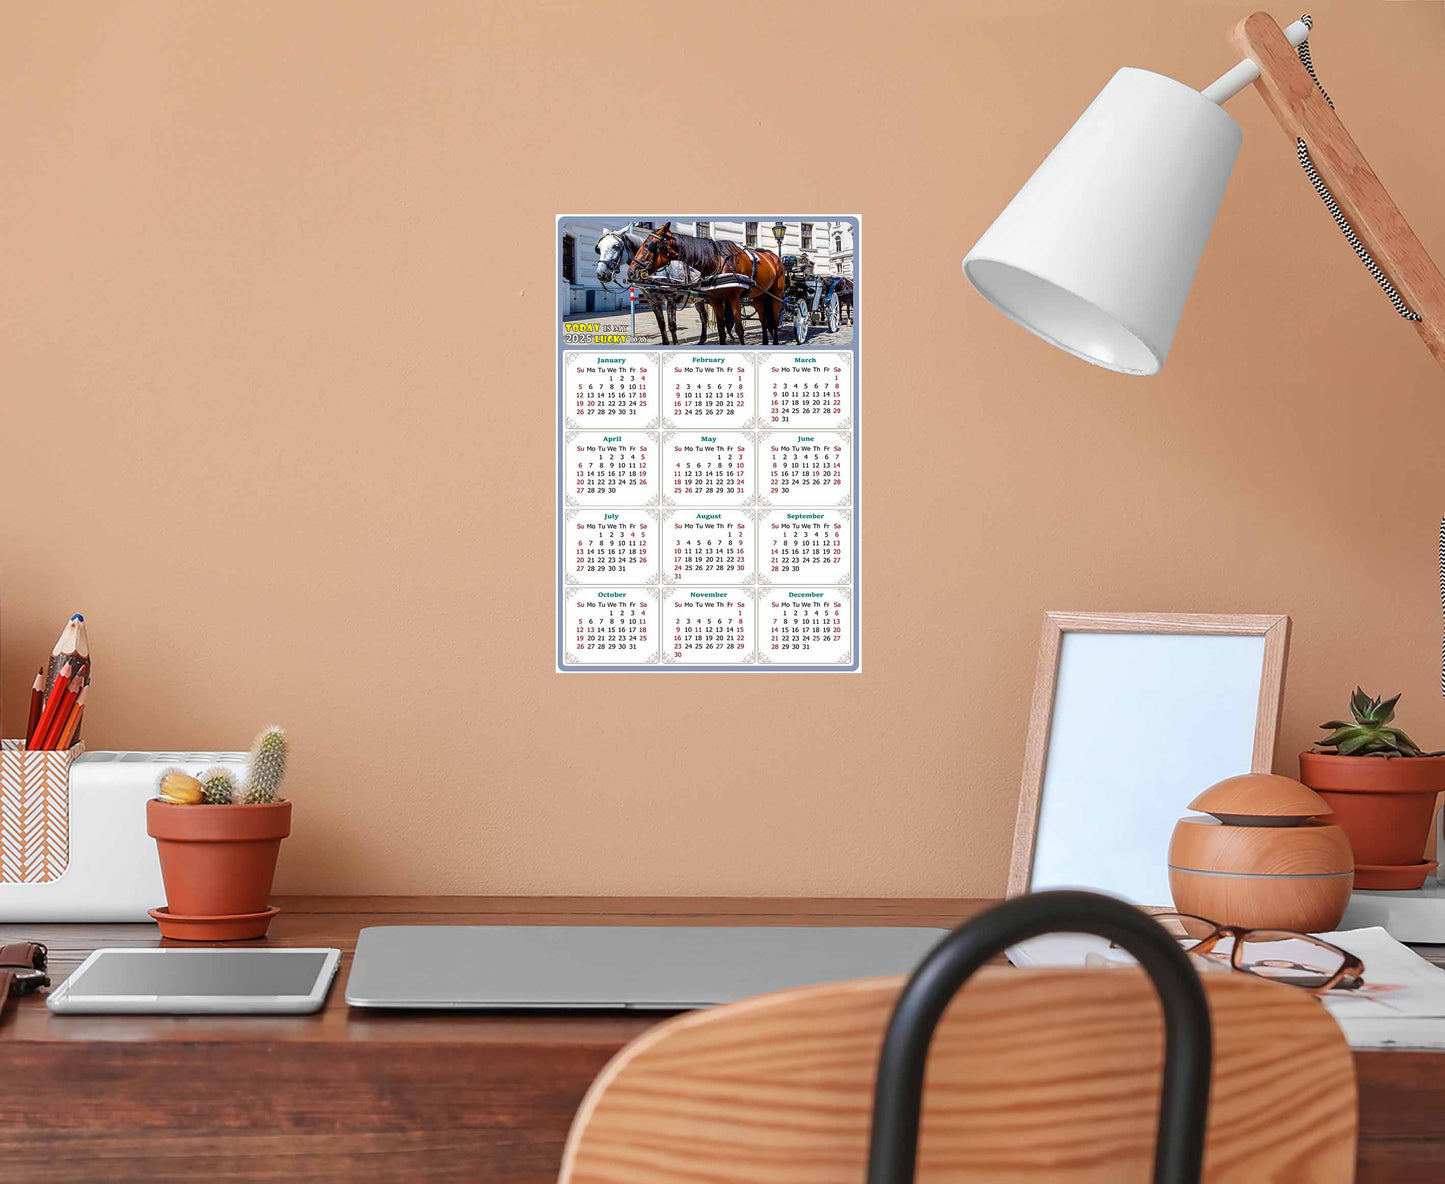 2025 Peel & Stick Calendar - Today is my Lucky Day Removable - Horses 018 (9"x 6")